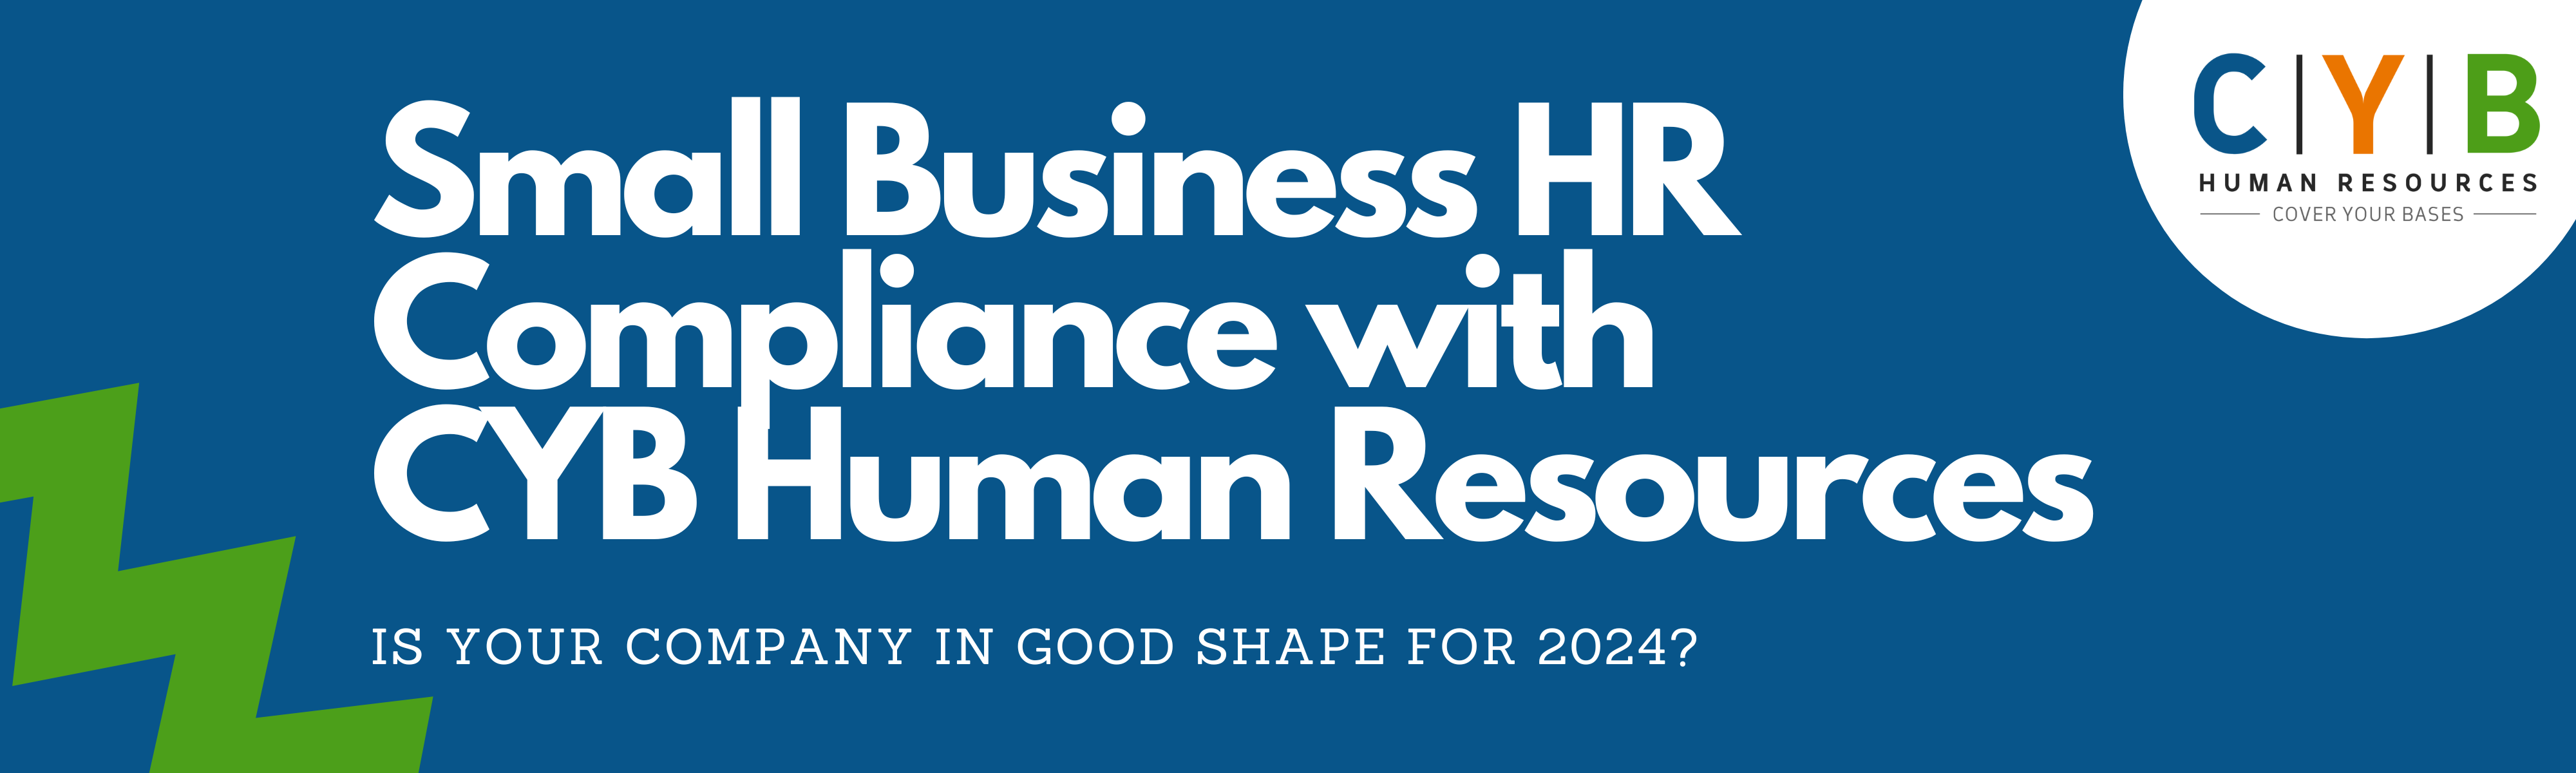 Small Business Human Resources Compliance